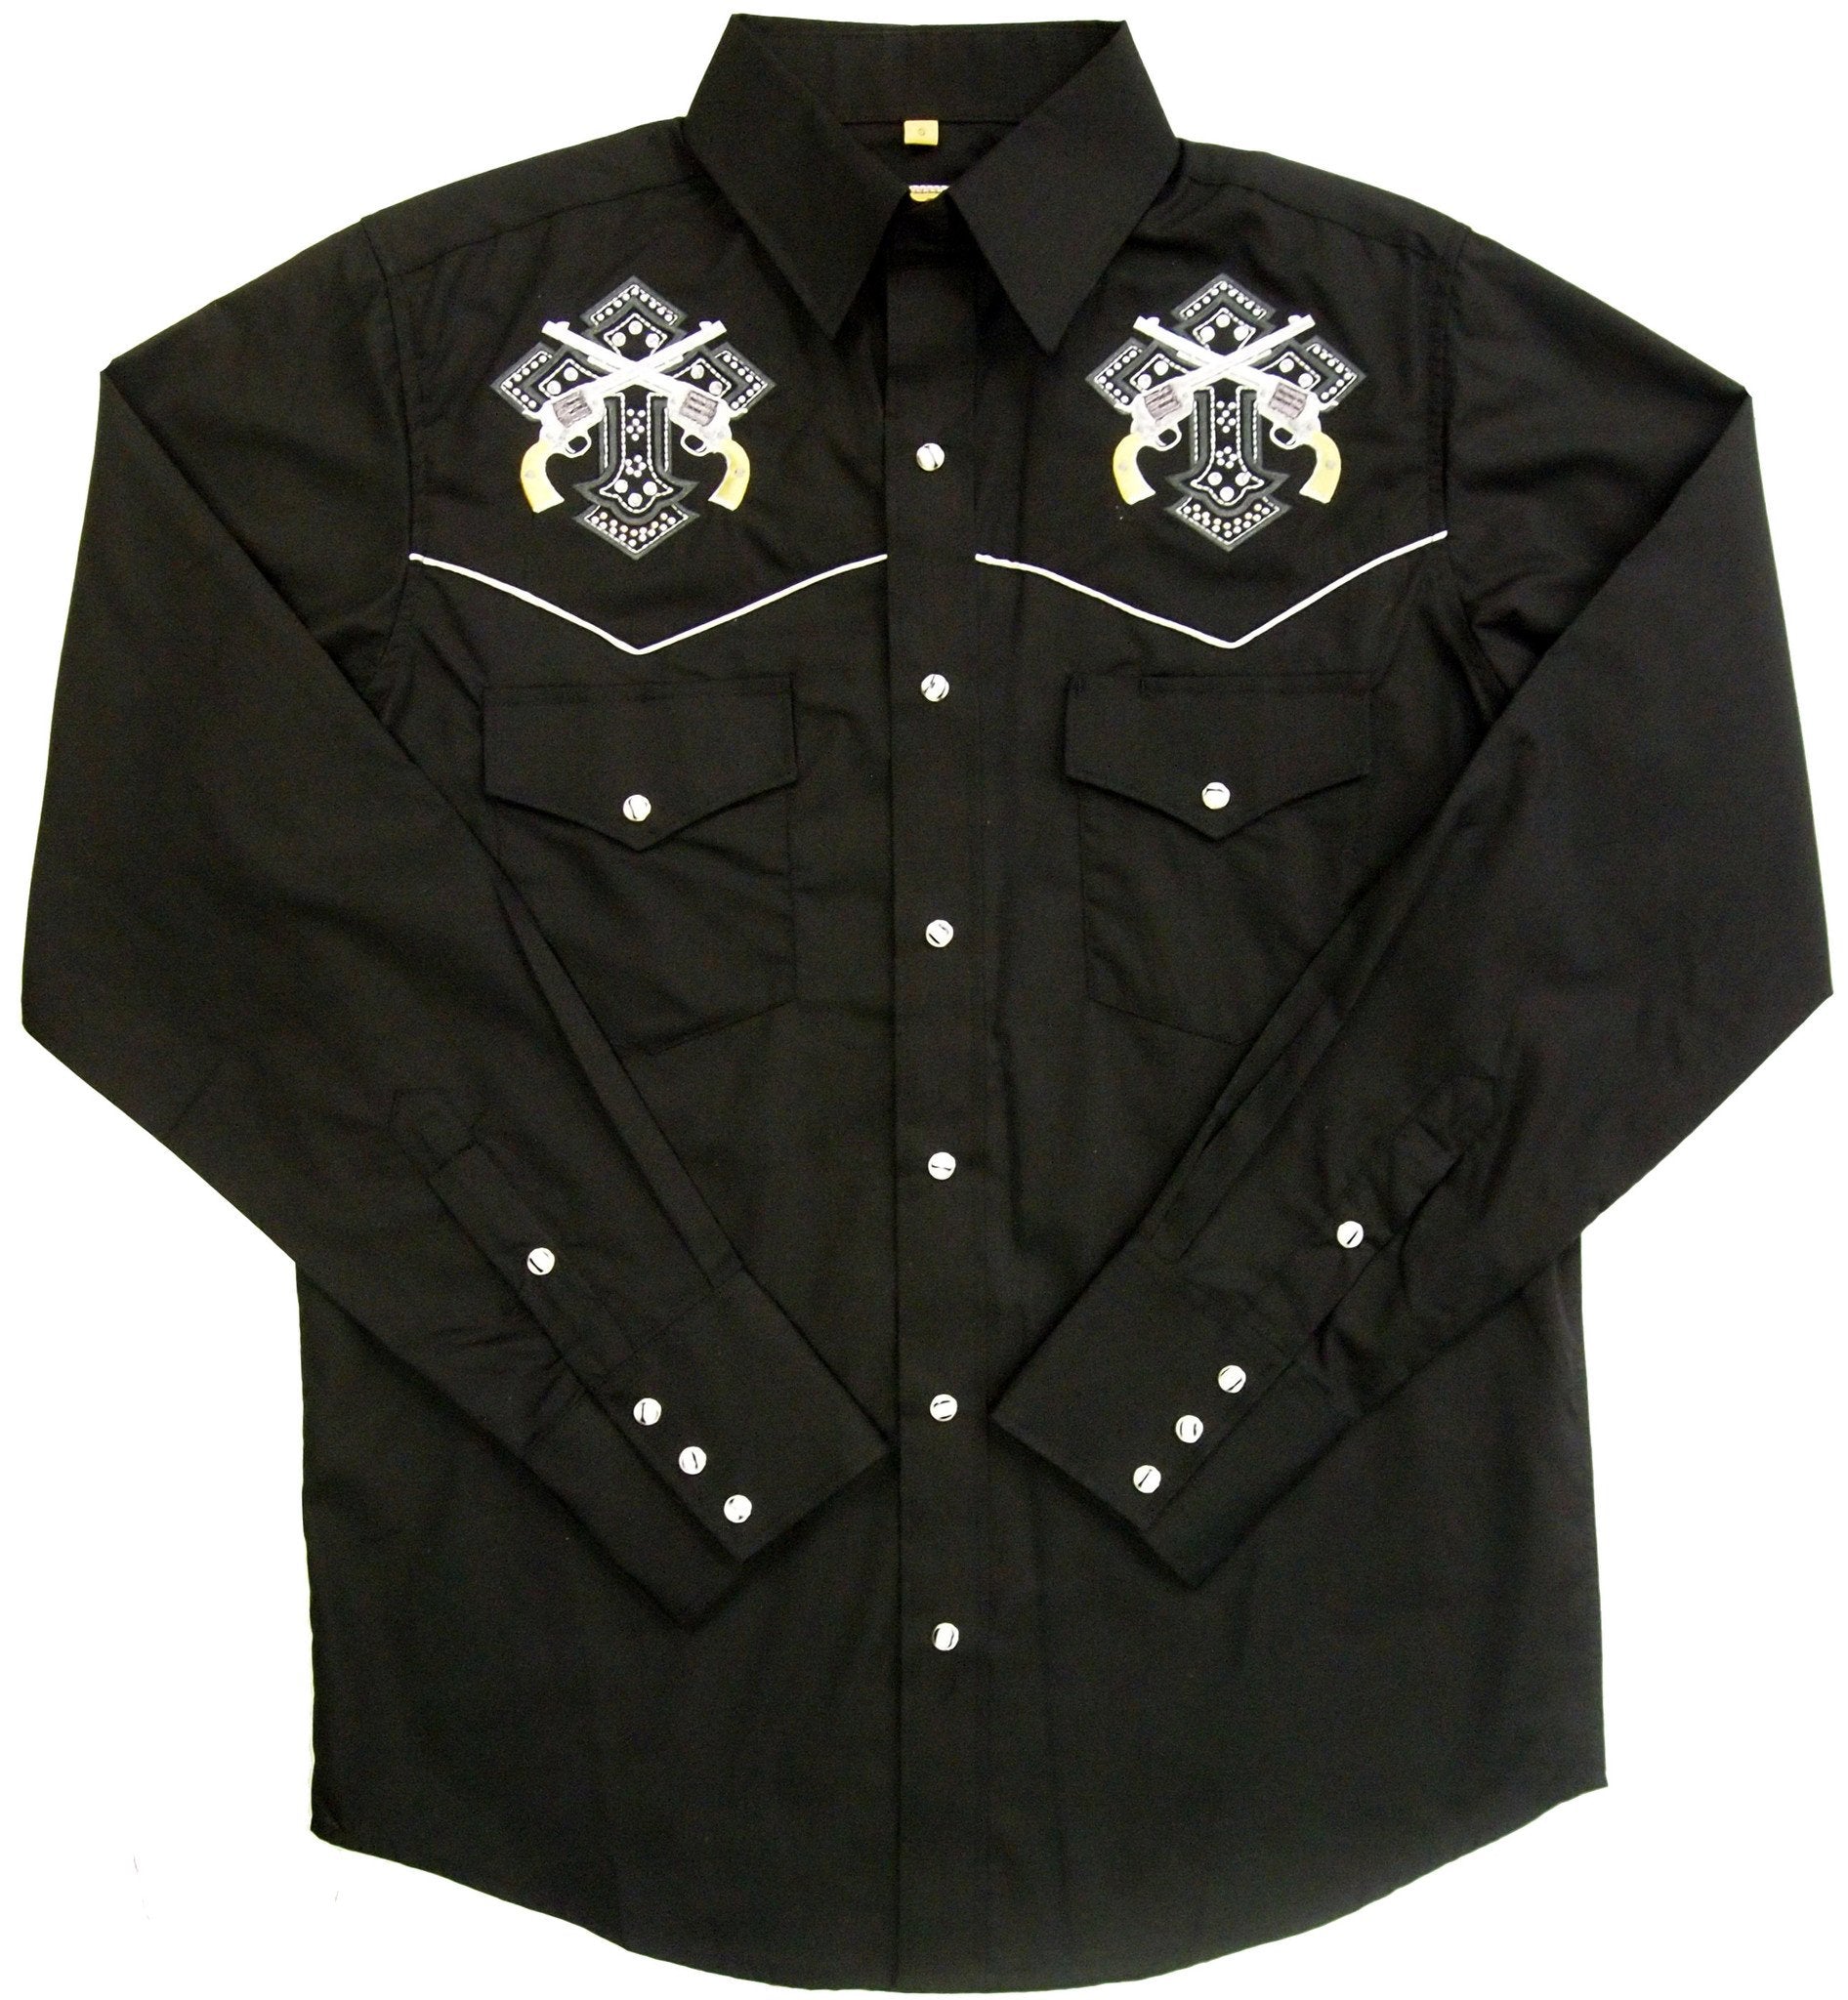 Men's Embroidered Western Shirt: White Horse Cross and Pistols